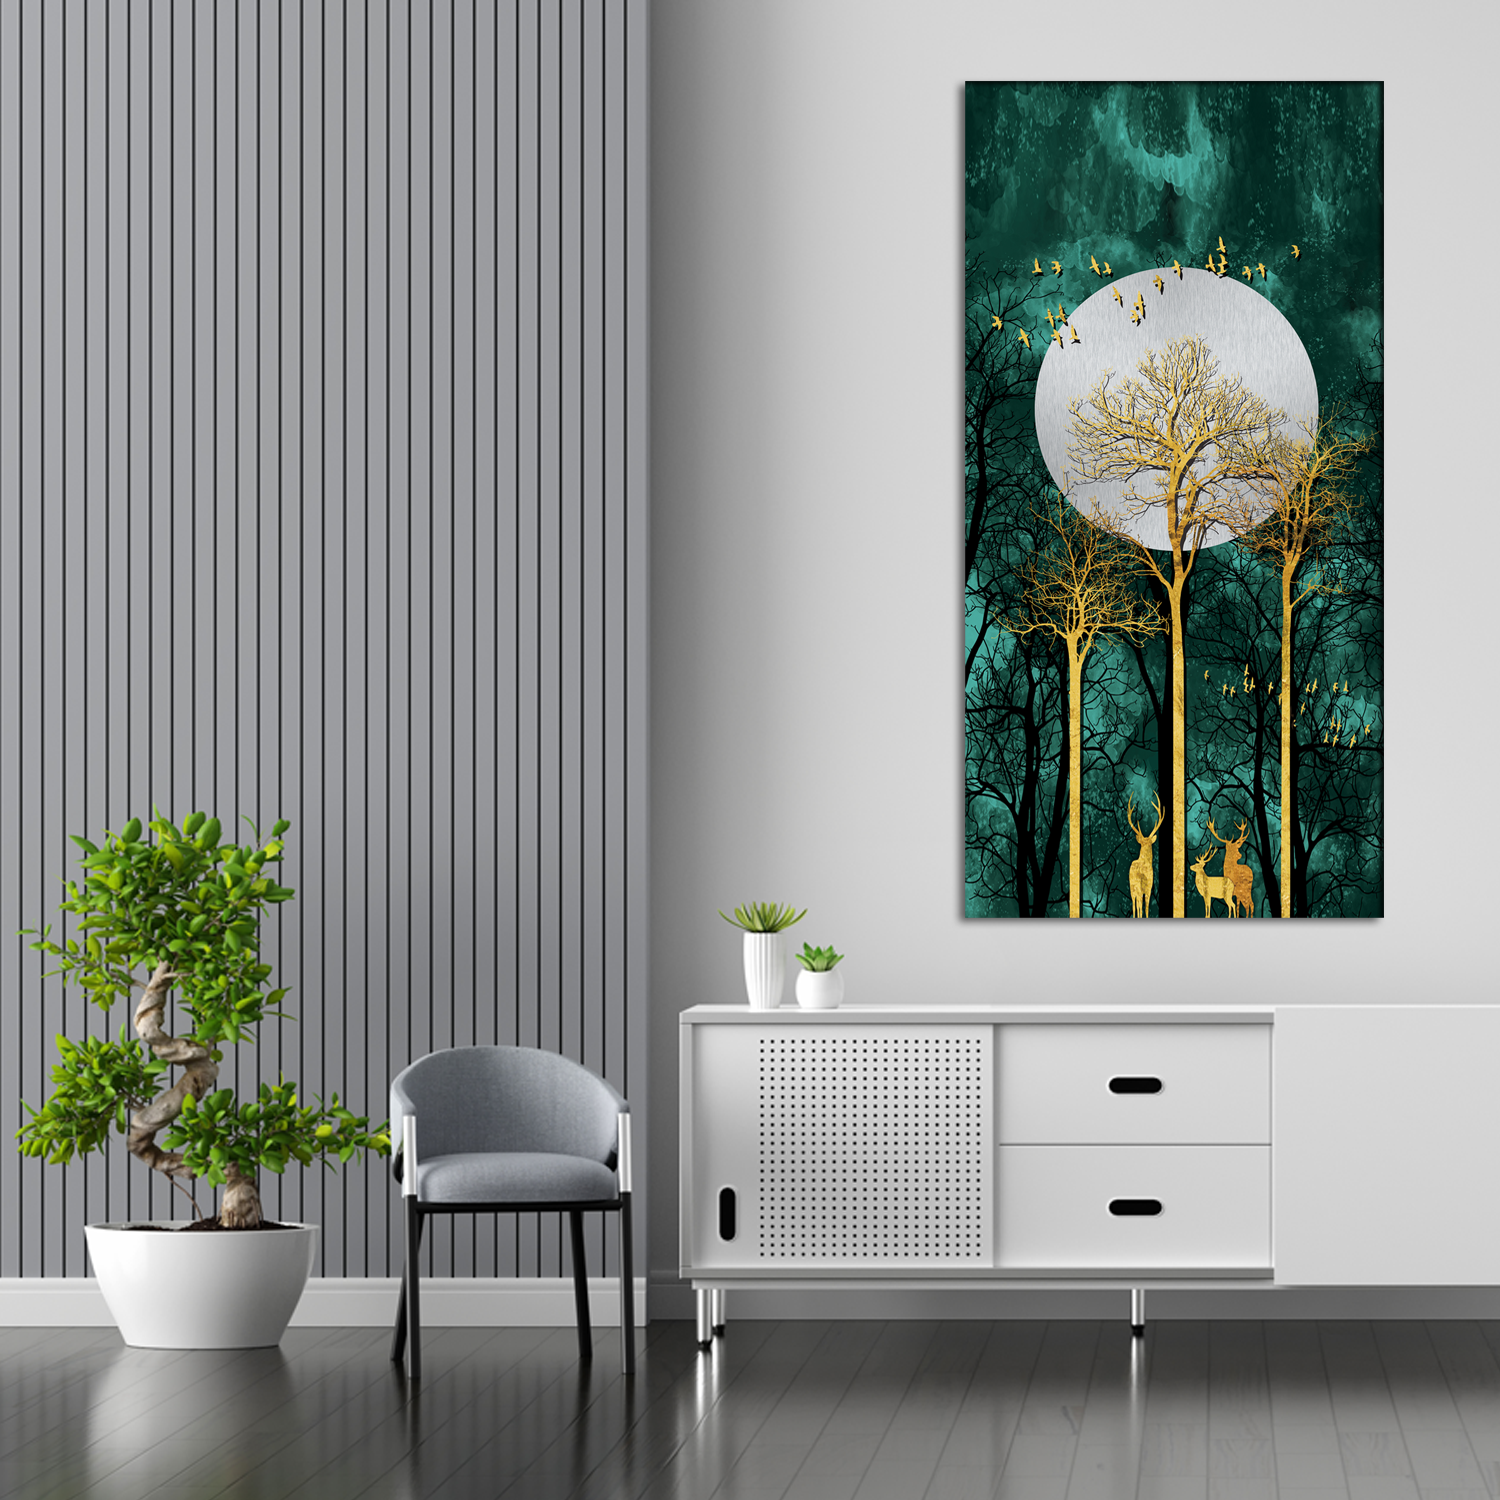 Moon and Flying Birds Canvas Wall Painting